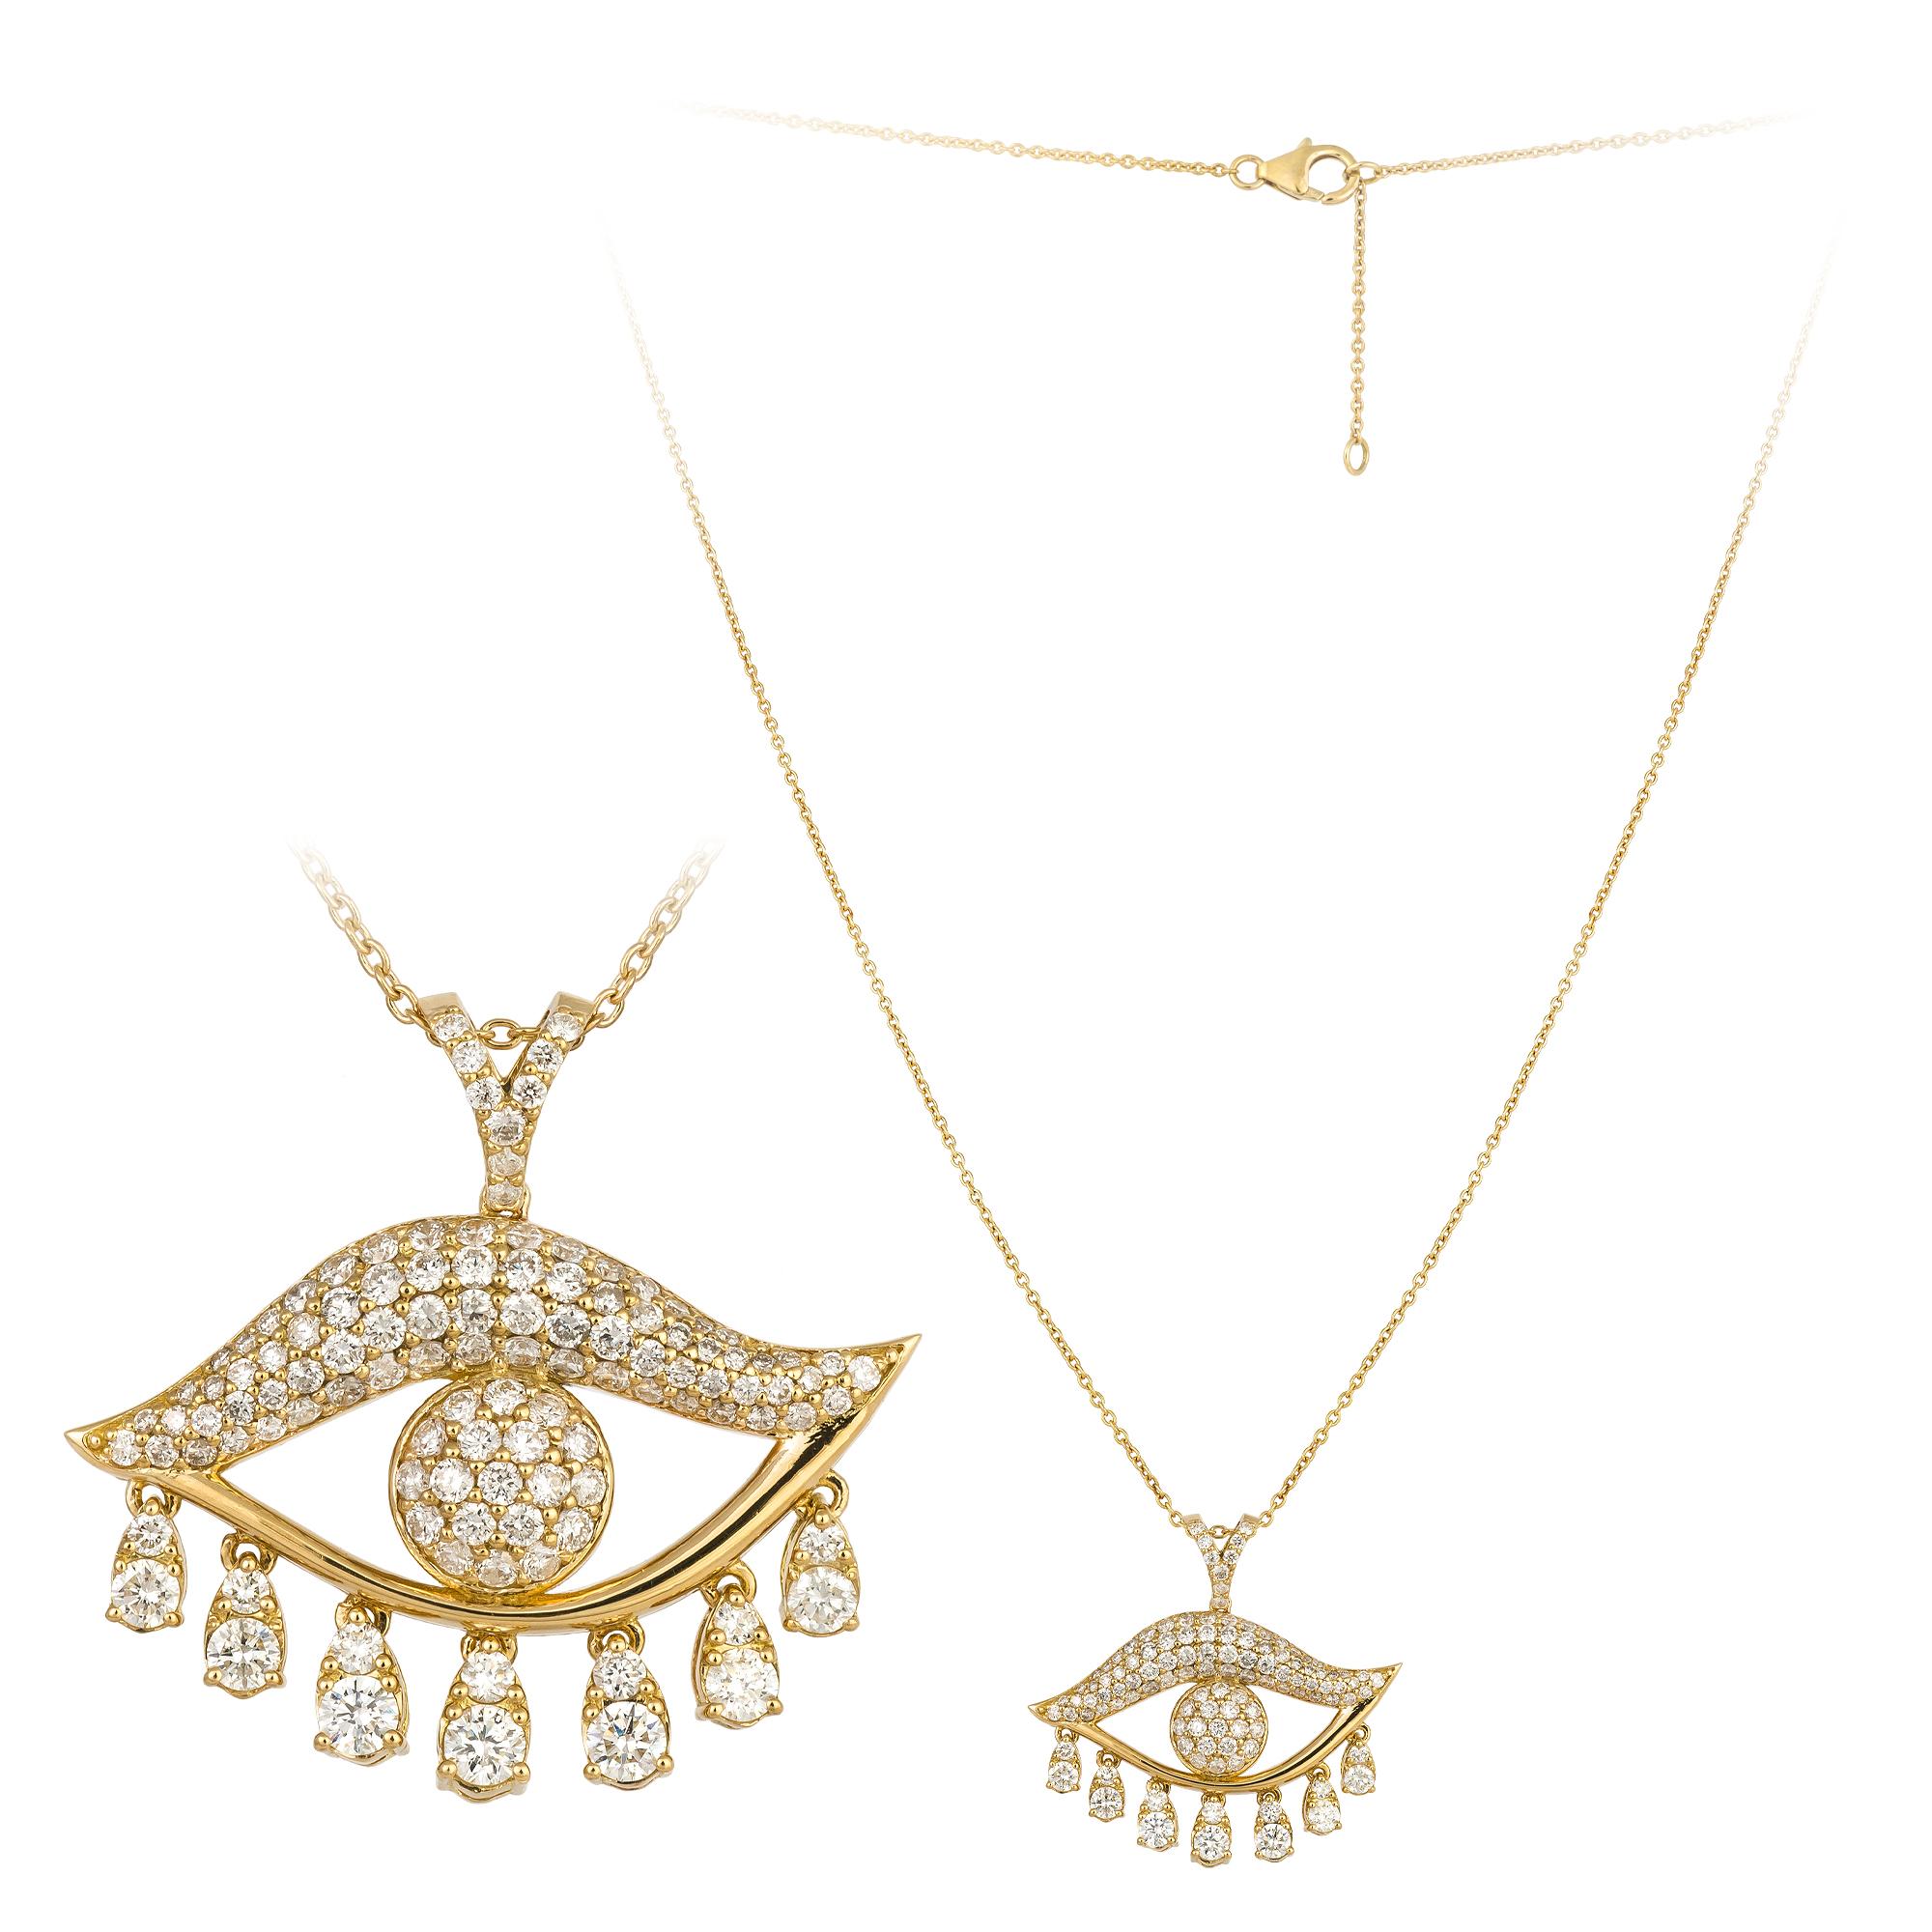 Designer Protection from the Evil Eye Yellow Gold 18K Necklace for Her/ Him For Sale